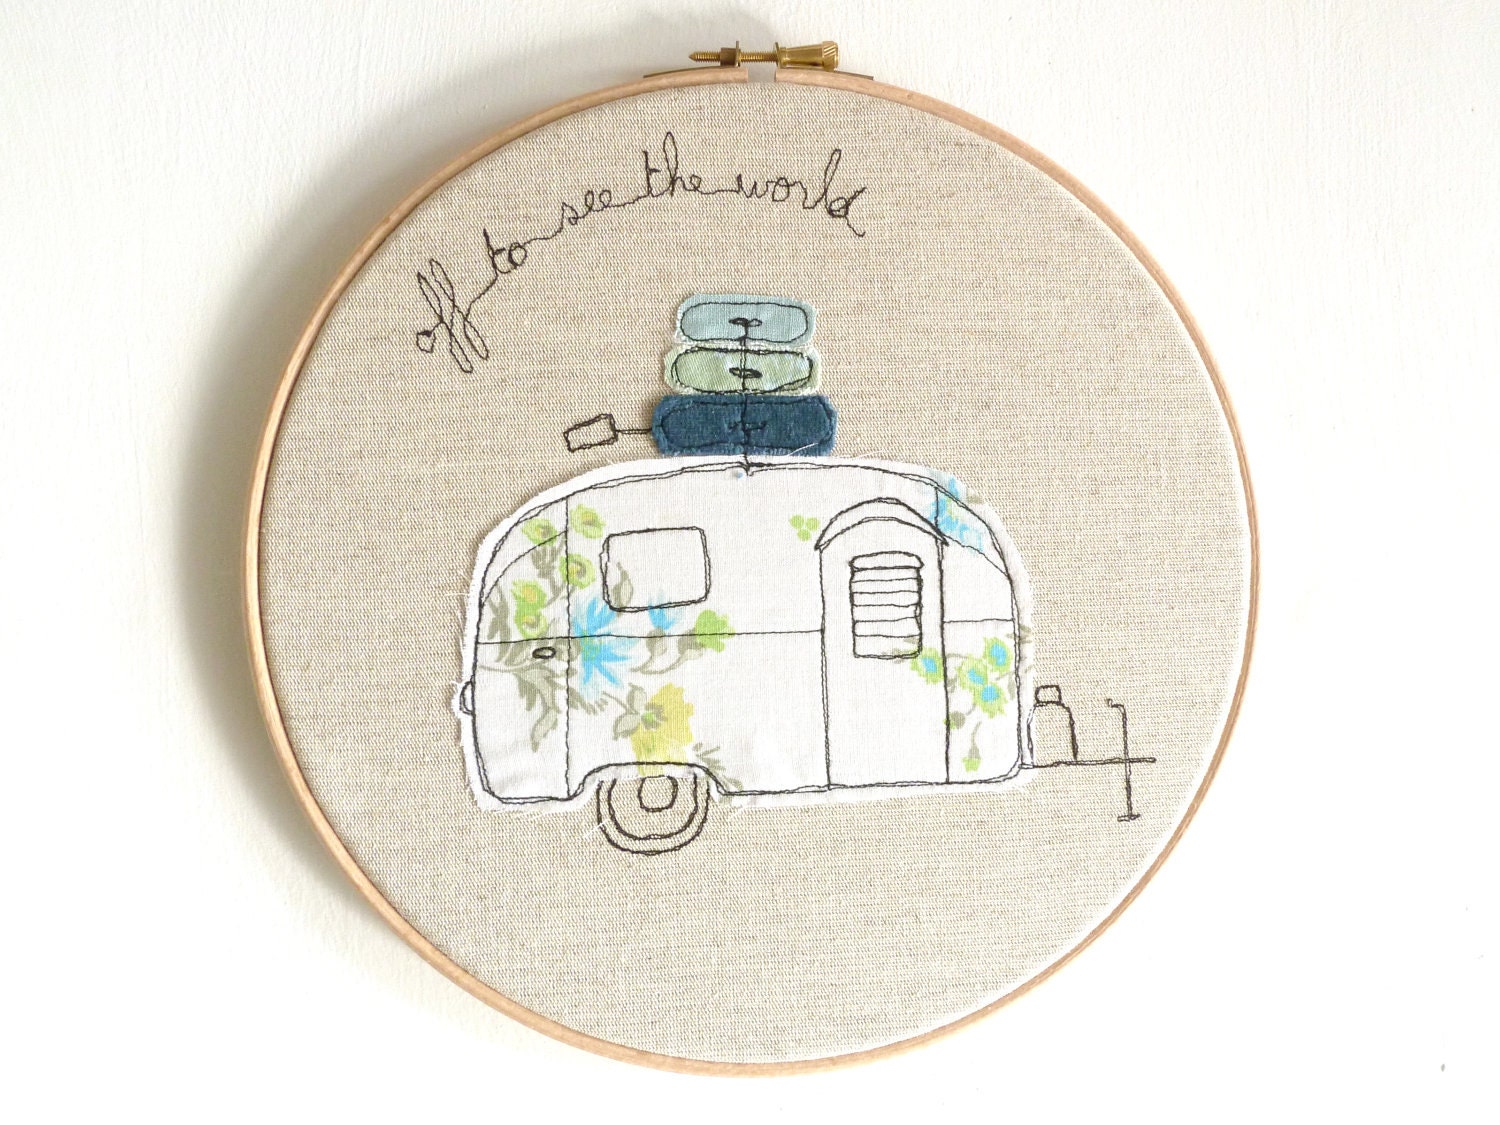 Embroidered Hoop Art - Airstream Bambi Textile Artwork in blue and green - Large 10" hoop